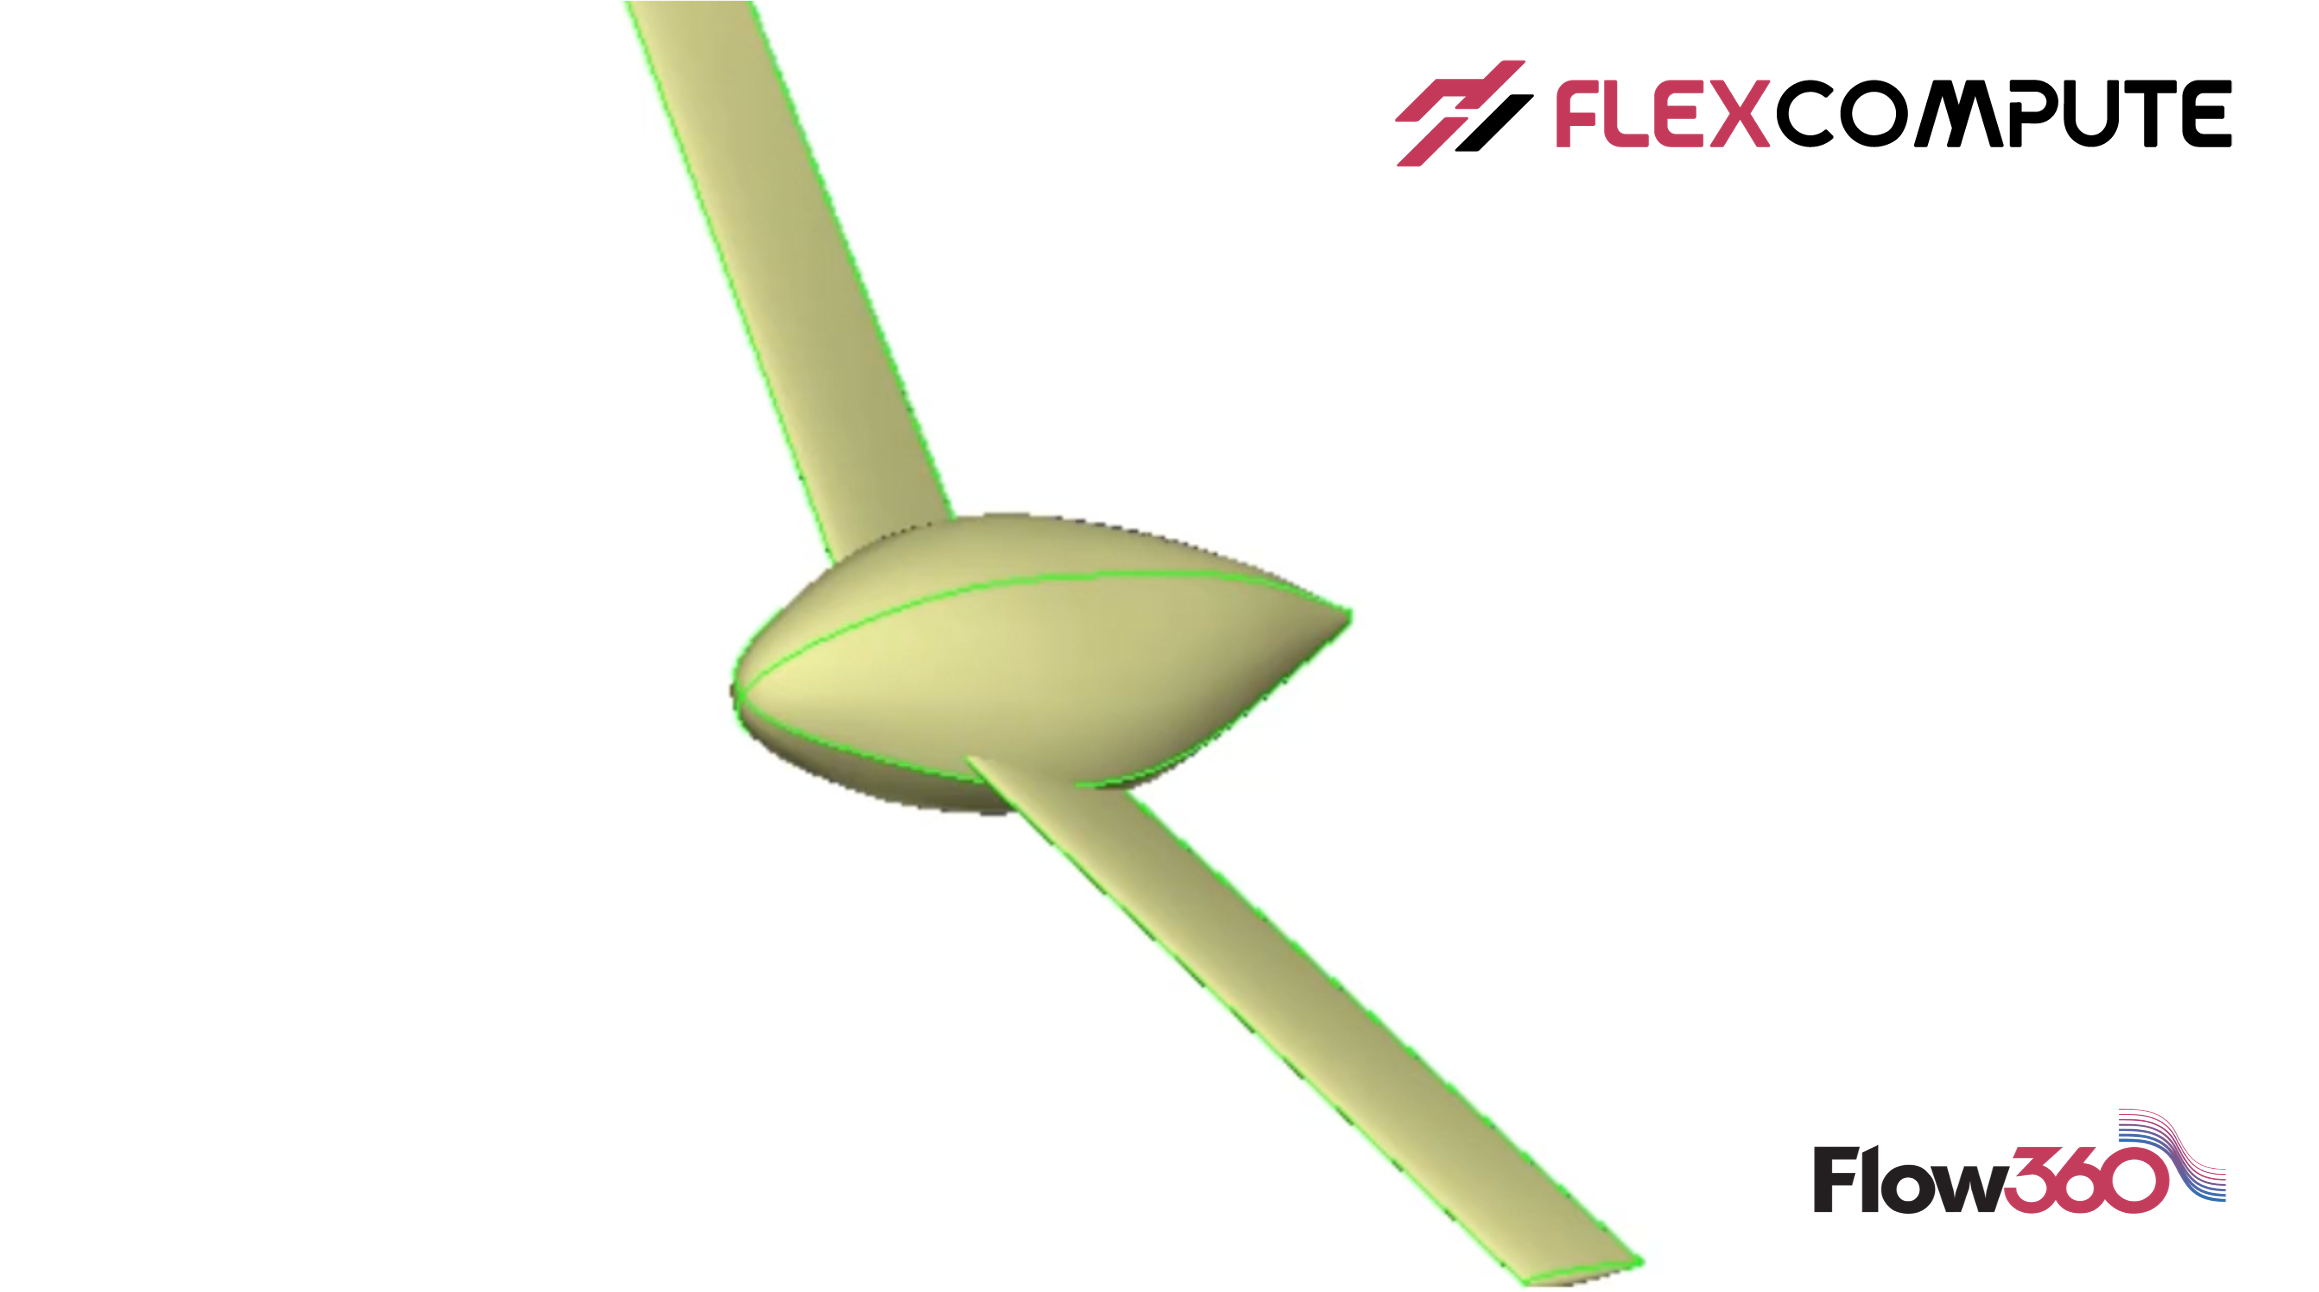 Lecture 2: How to construct the geometry of fuselage for aircraft CFD simulation